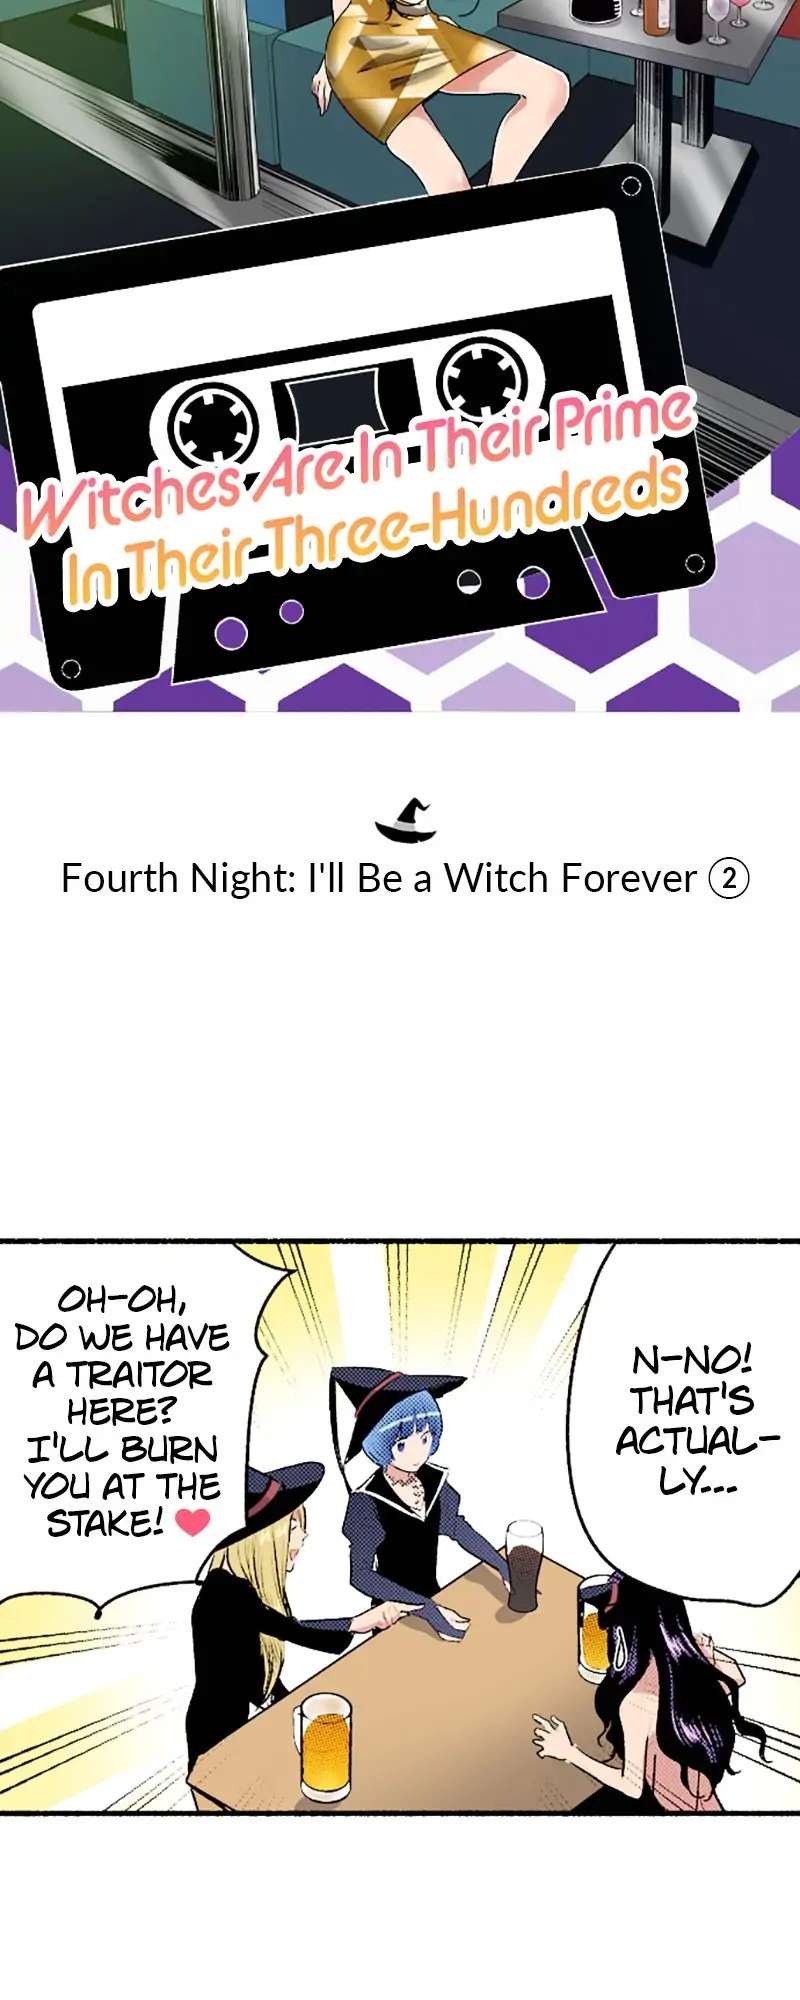 Witches Are In Their Prime In Their Three-Hundreds ( Color) - Page 3